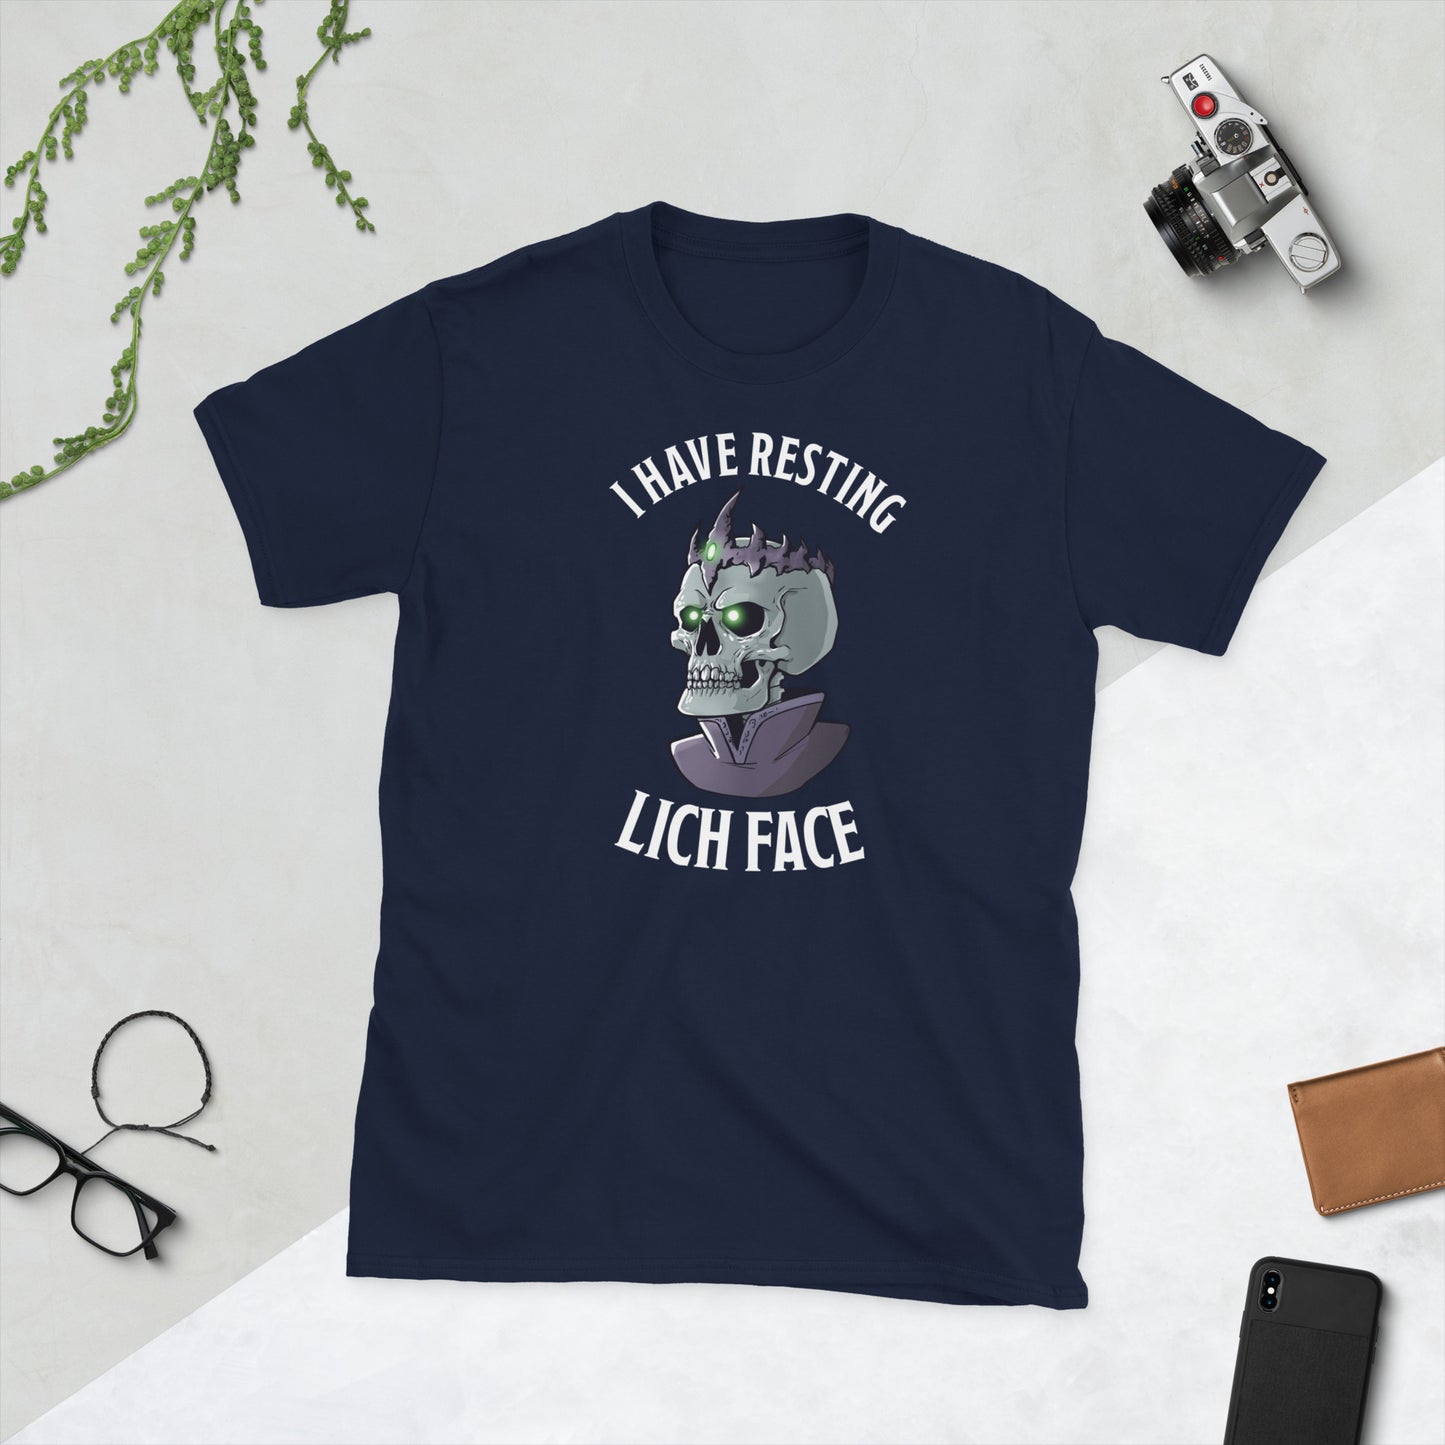 Resting Lich Face Short-Sleeve Unisex T-Shirt  Level 1 Gamers Navy S 